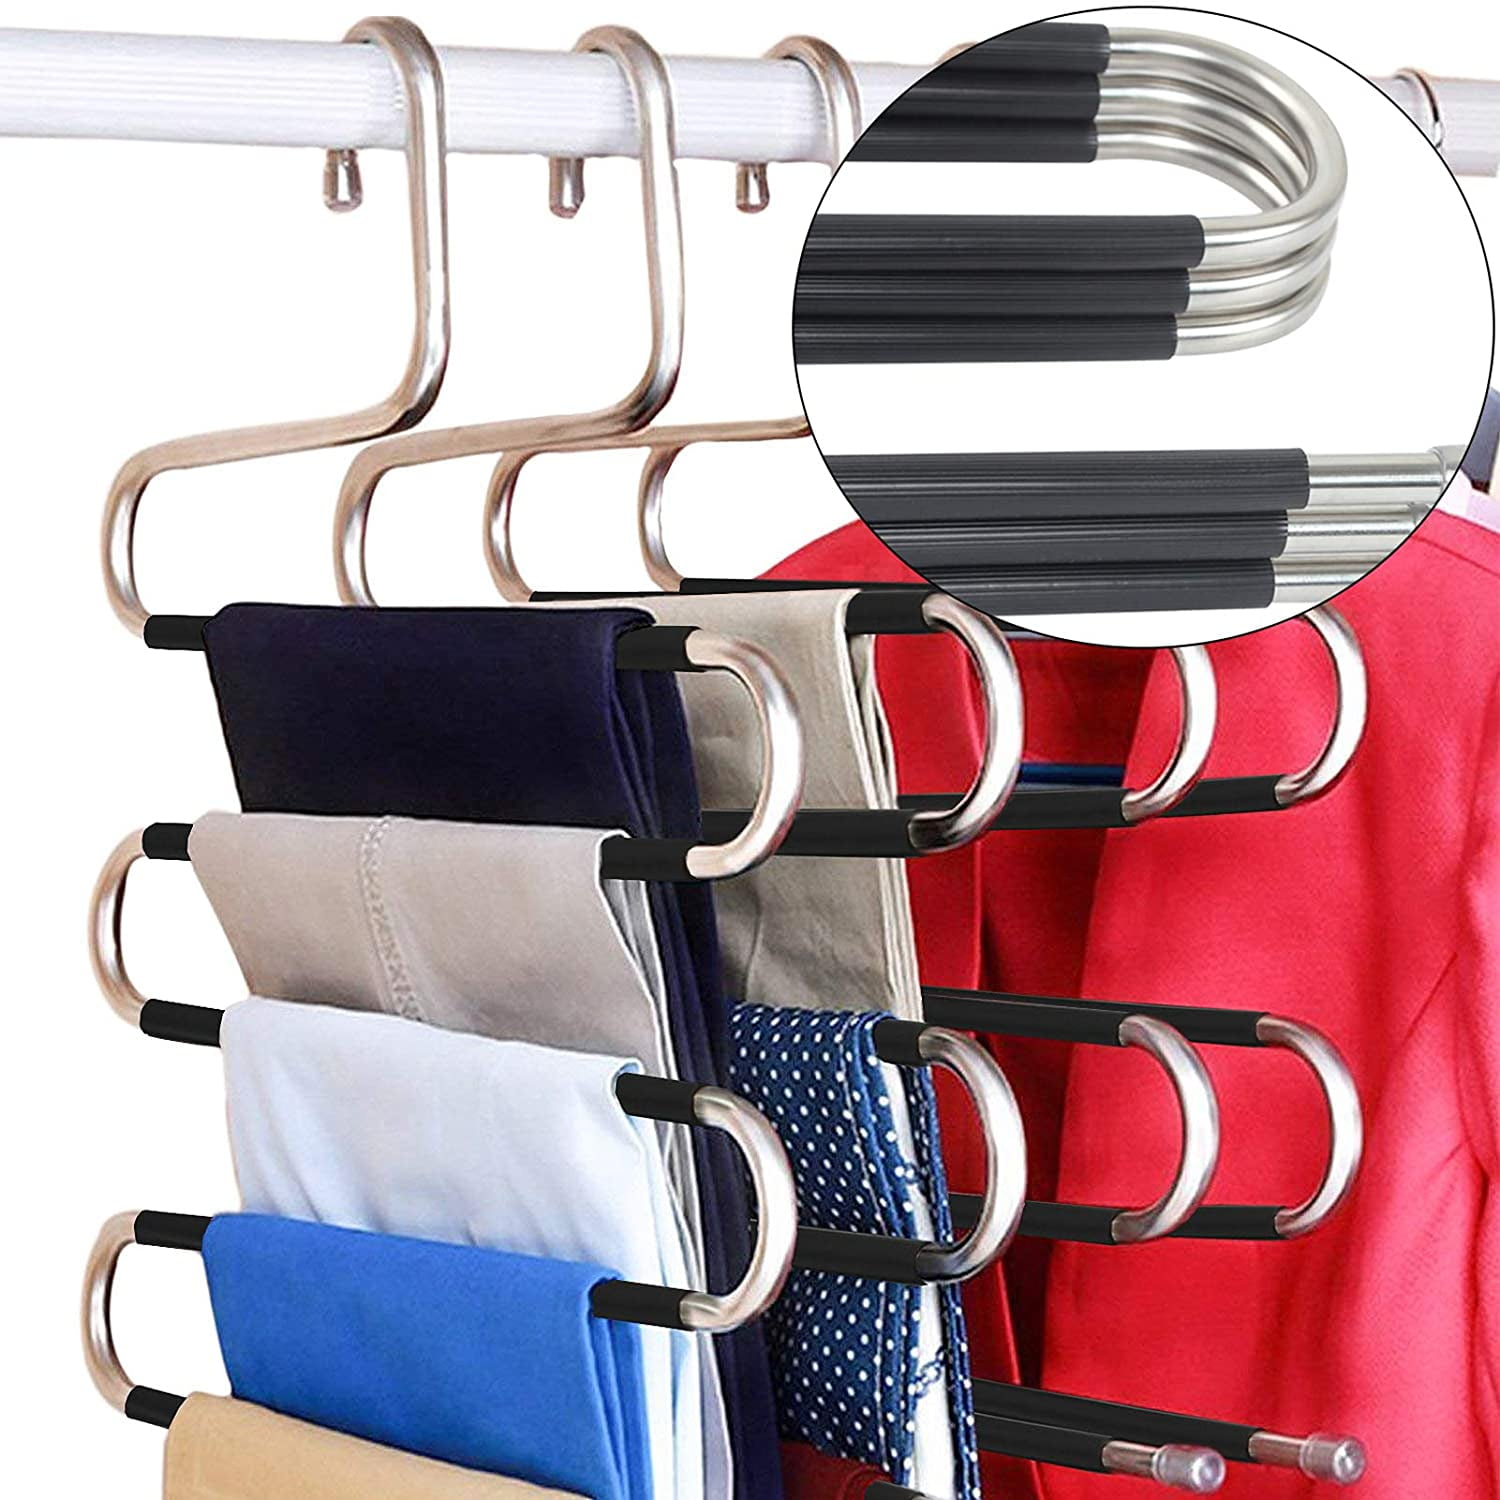 IEOKE Pant Hangers Durable Slack Hangers Multi Layers Stainless Steel Space Saving Clothes Hangers Closet Storage for Jeans Trousers 4 Pack